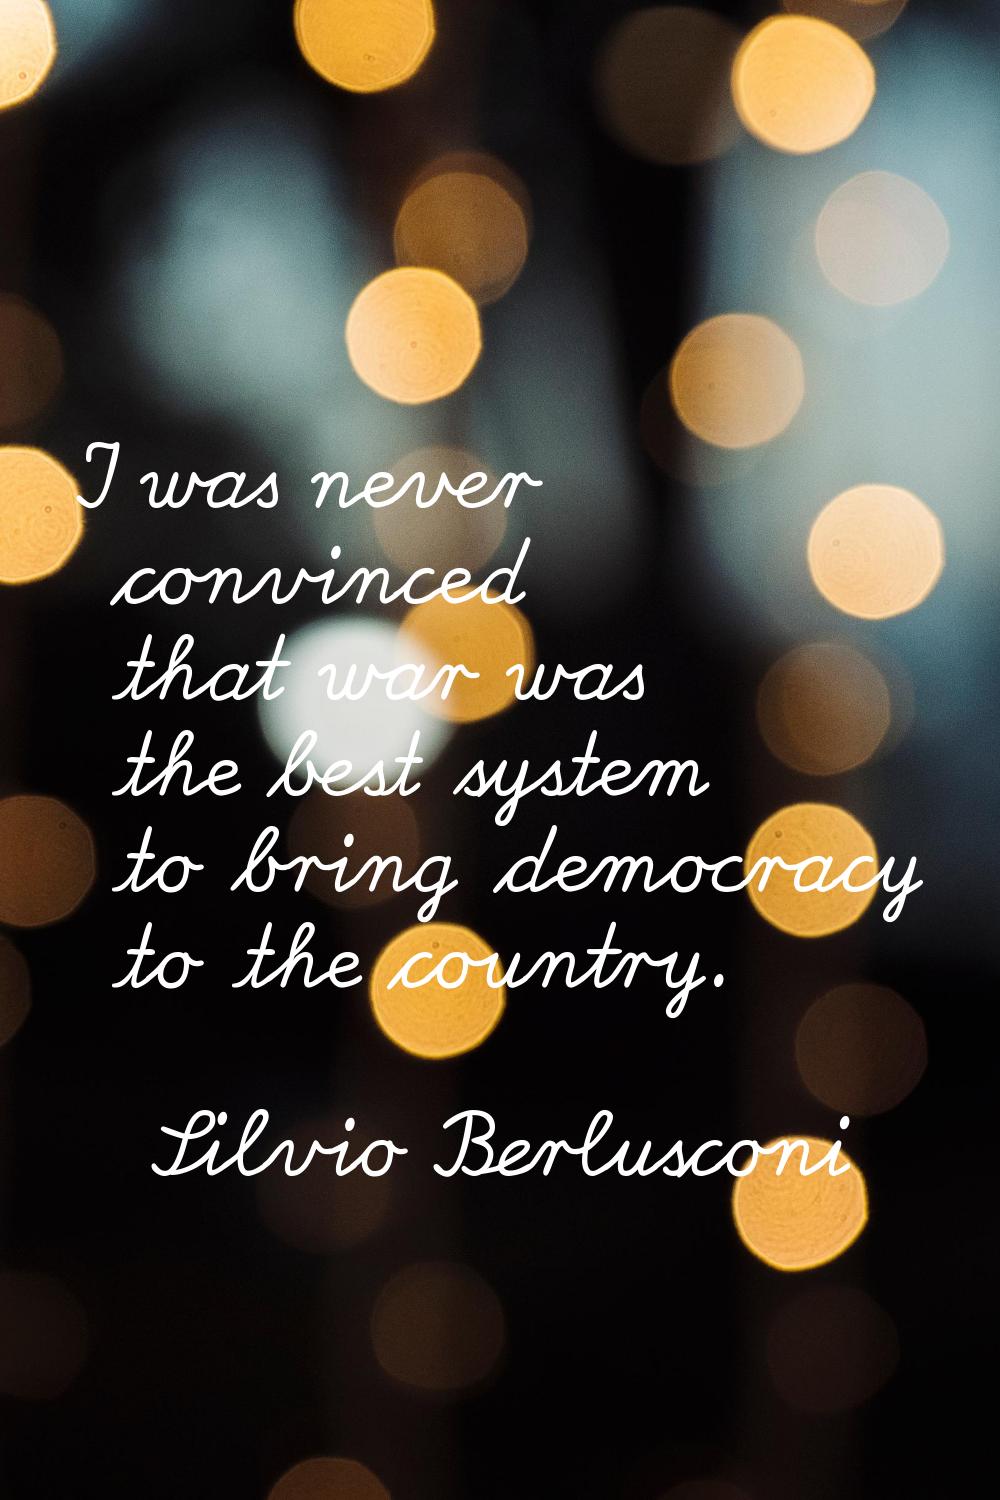 I was never convinced that war was the best system to bring democracy to the country.